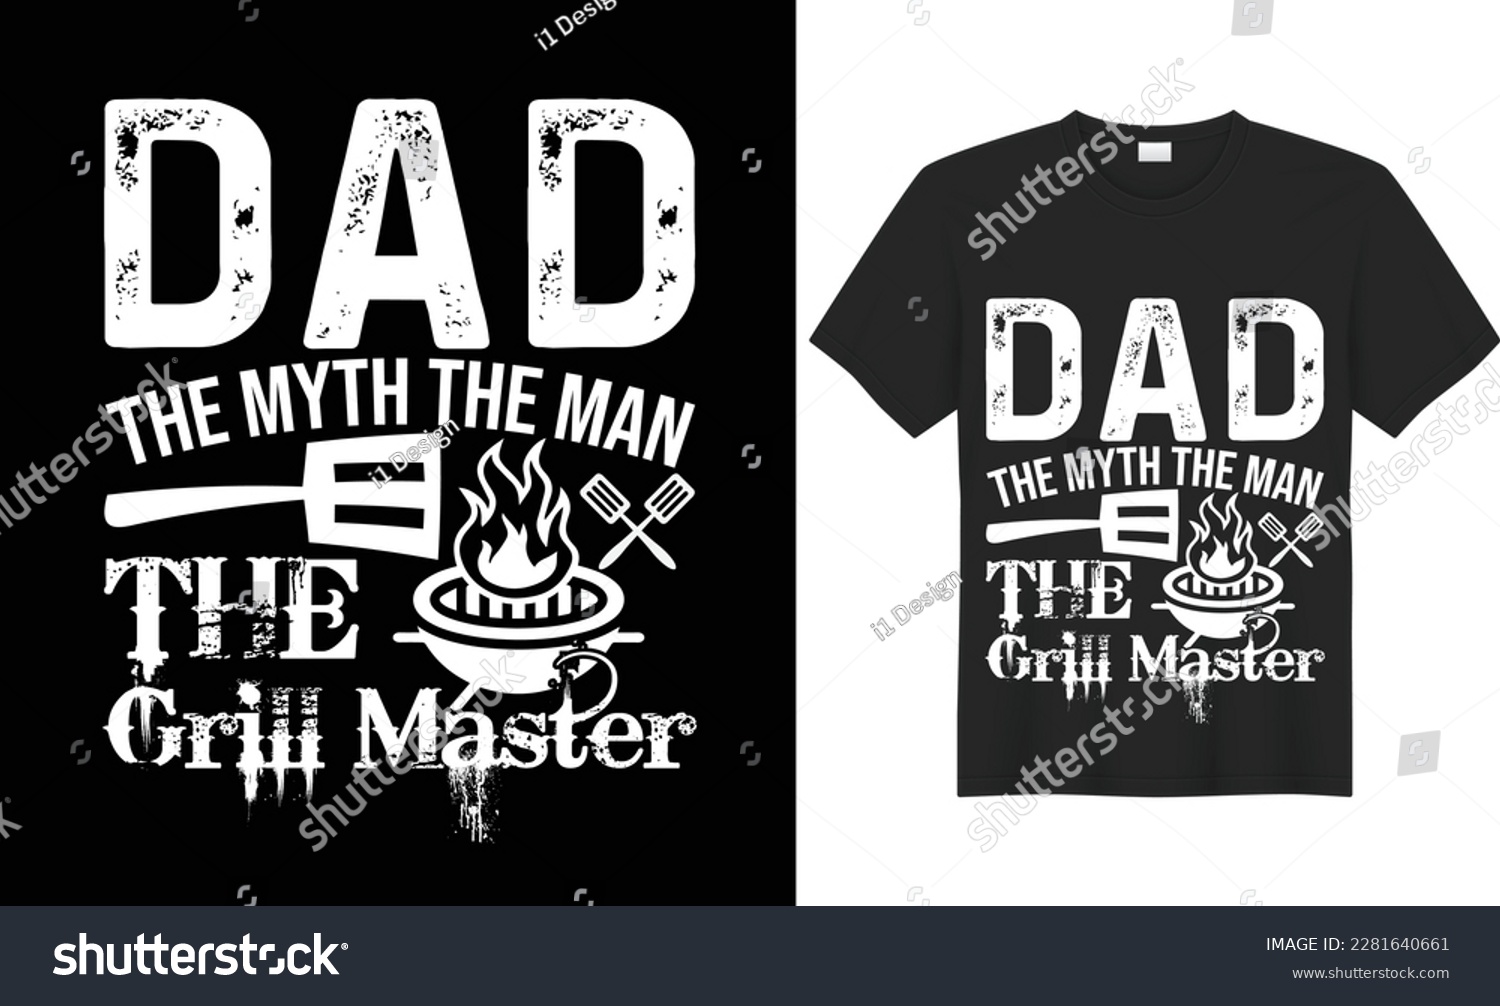 SVG of Dad the Man The Myth the Grill Master Typography SVG T-shirt  Design Vector Template. Lettering Illustration And Printing for T-shirt, Banner, Poster, Flyers, Etc. svg